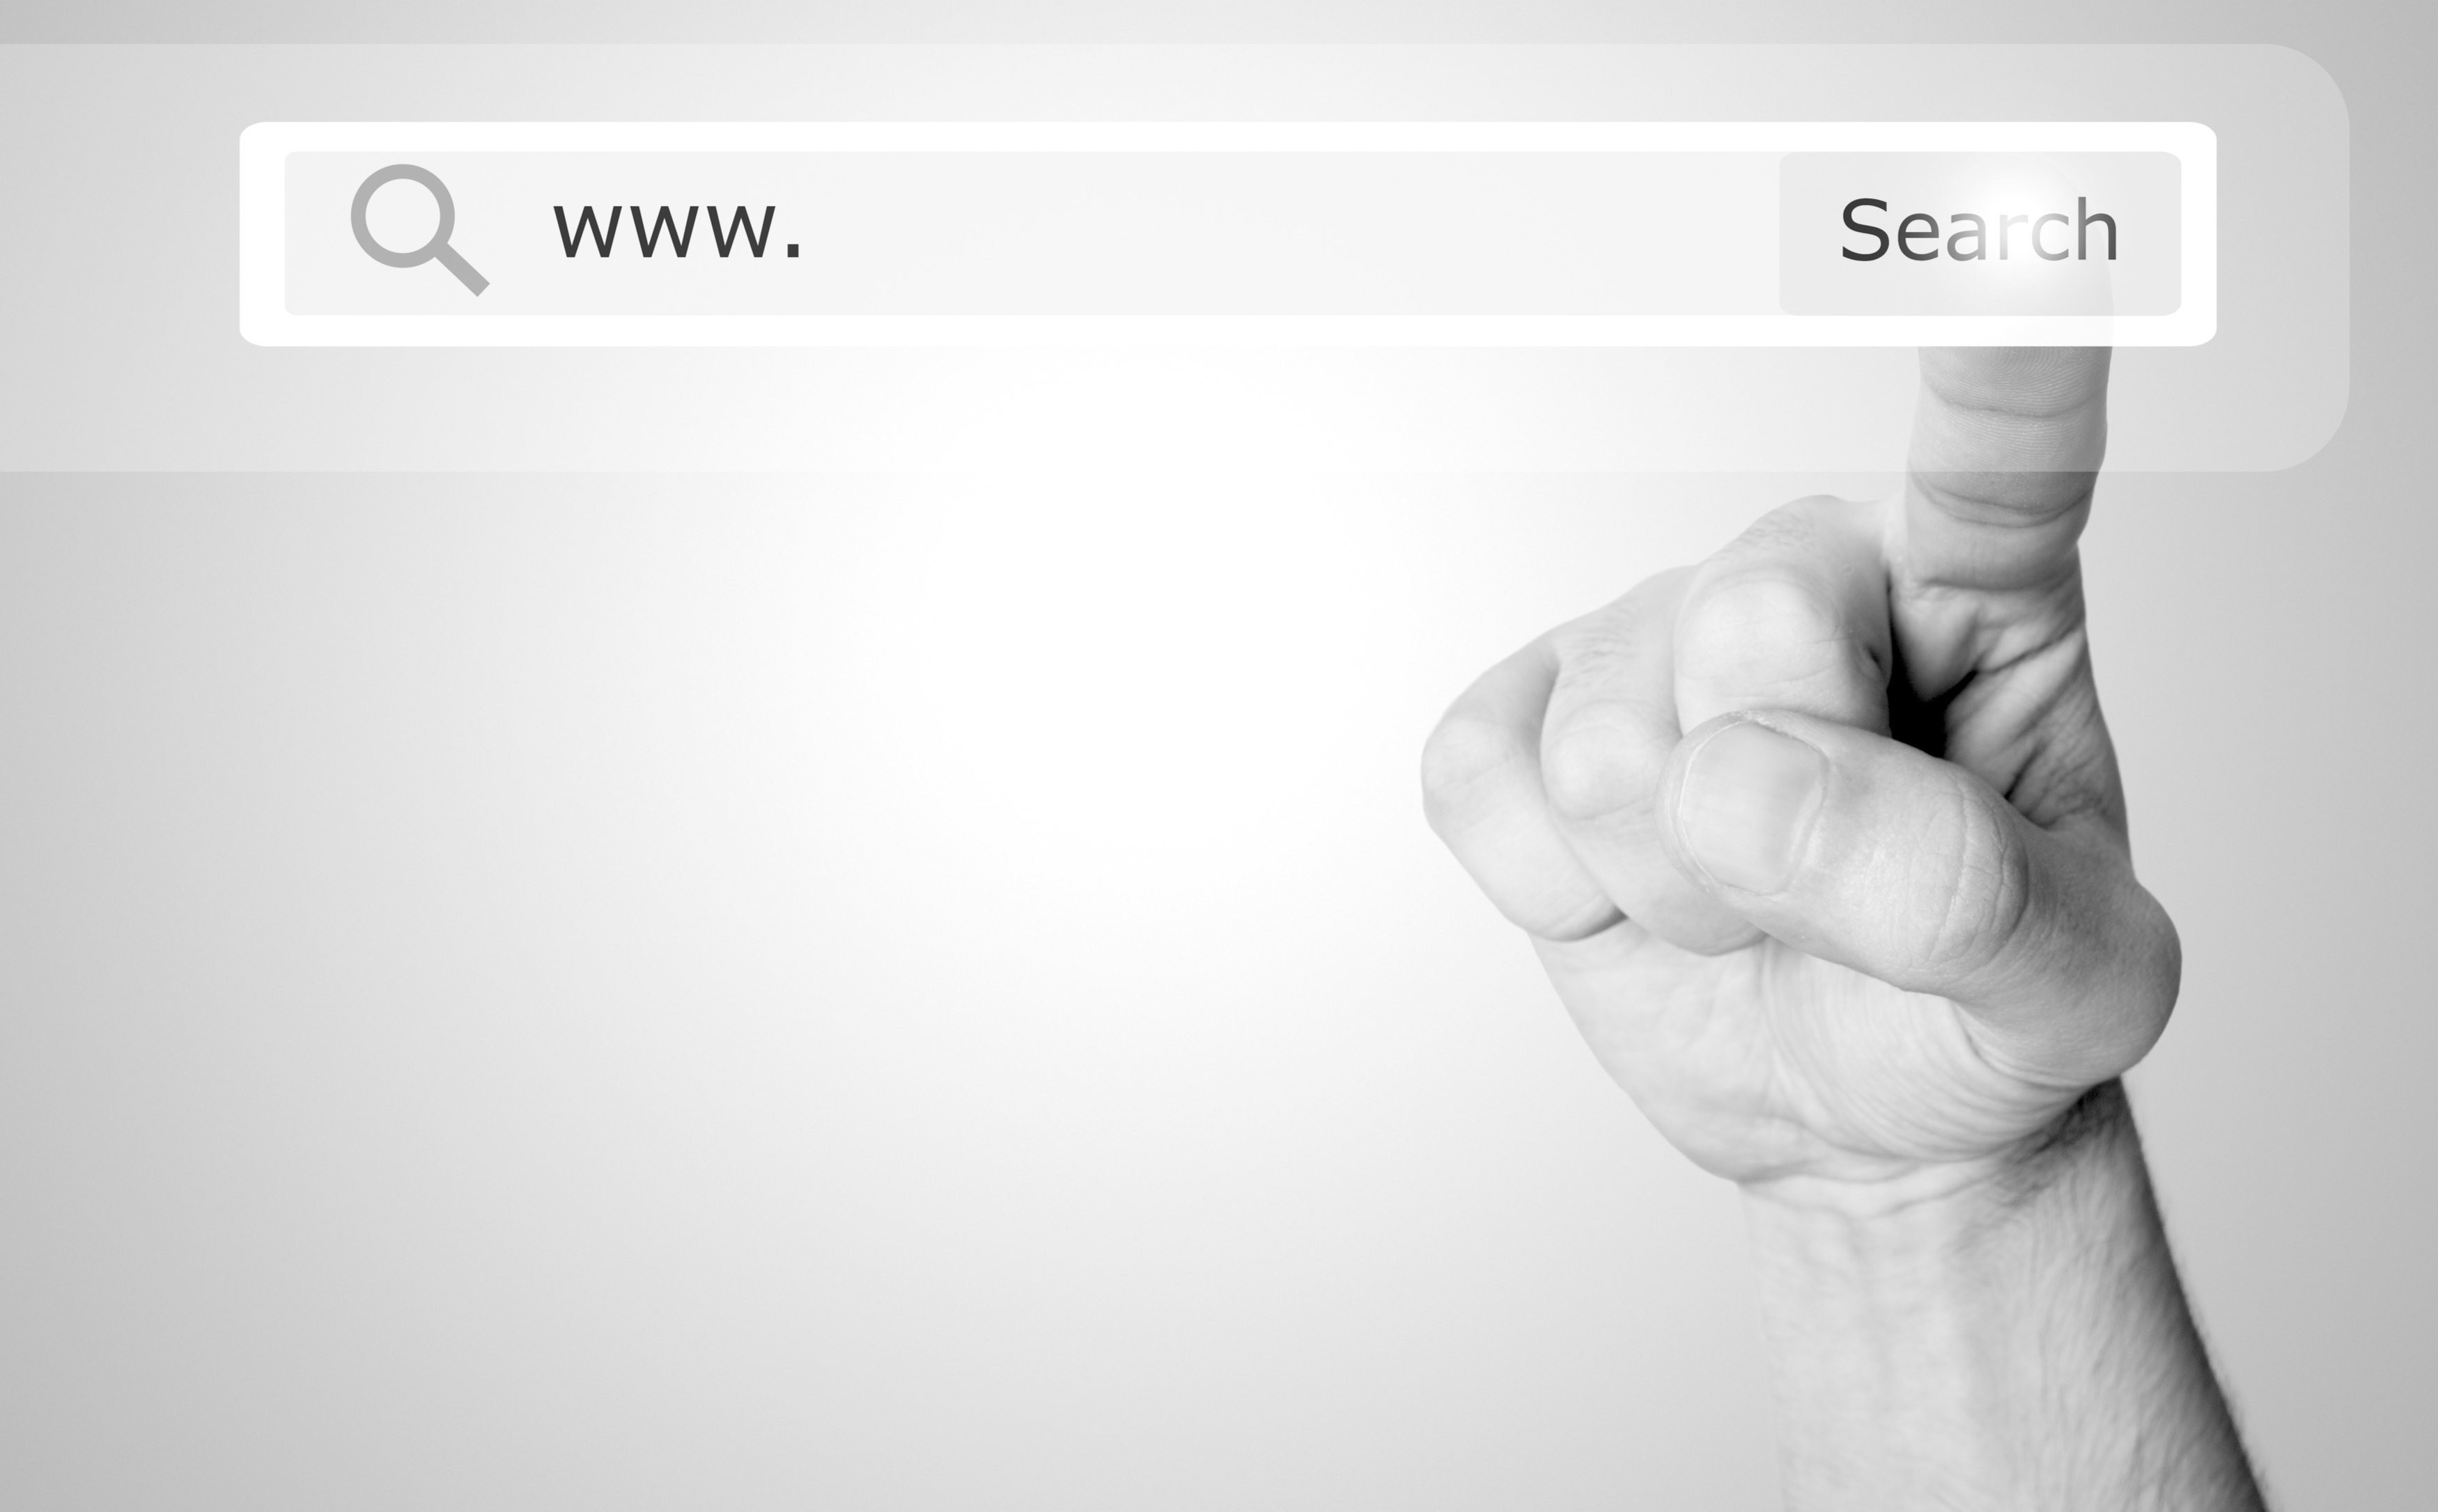 finger pointing at website URL over a blank background